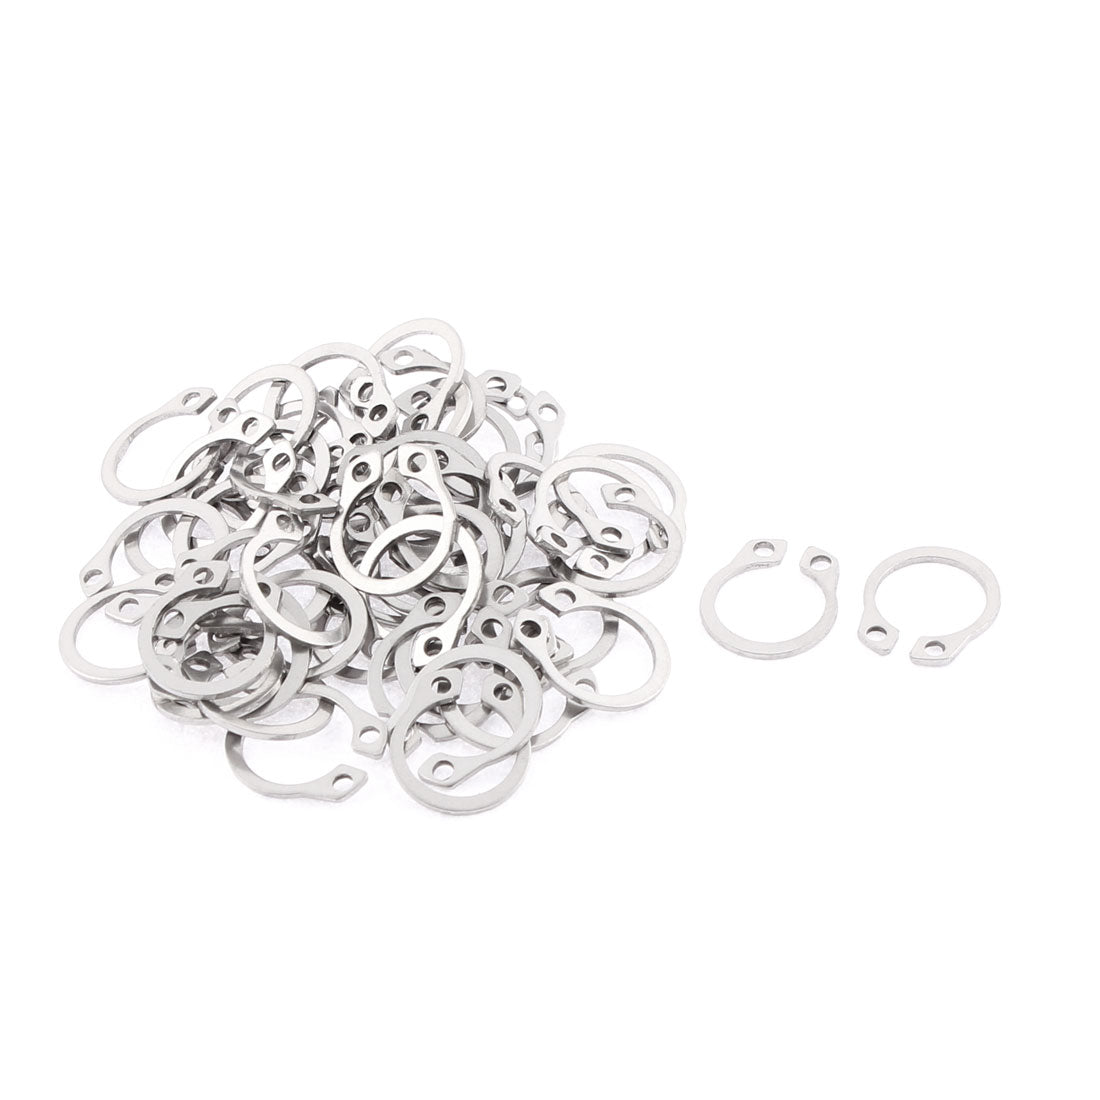 uxcell Uxcell 12mm Stainless Steel External Internal Circlips C-Clip Retaining Snap Ring 50pcs